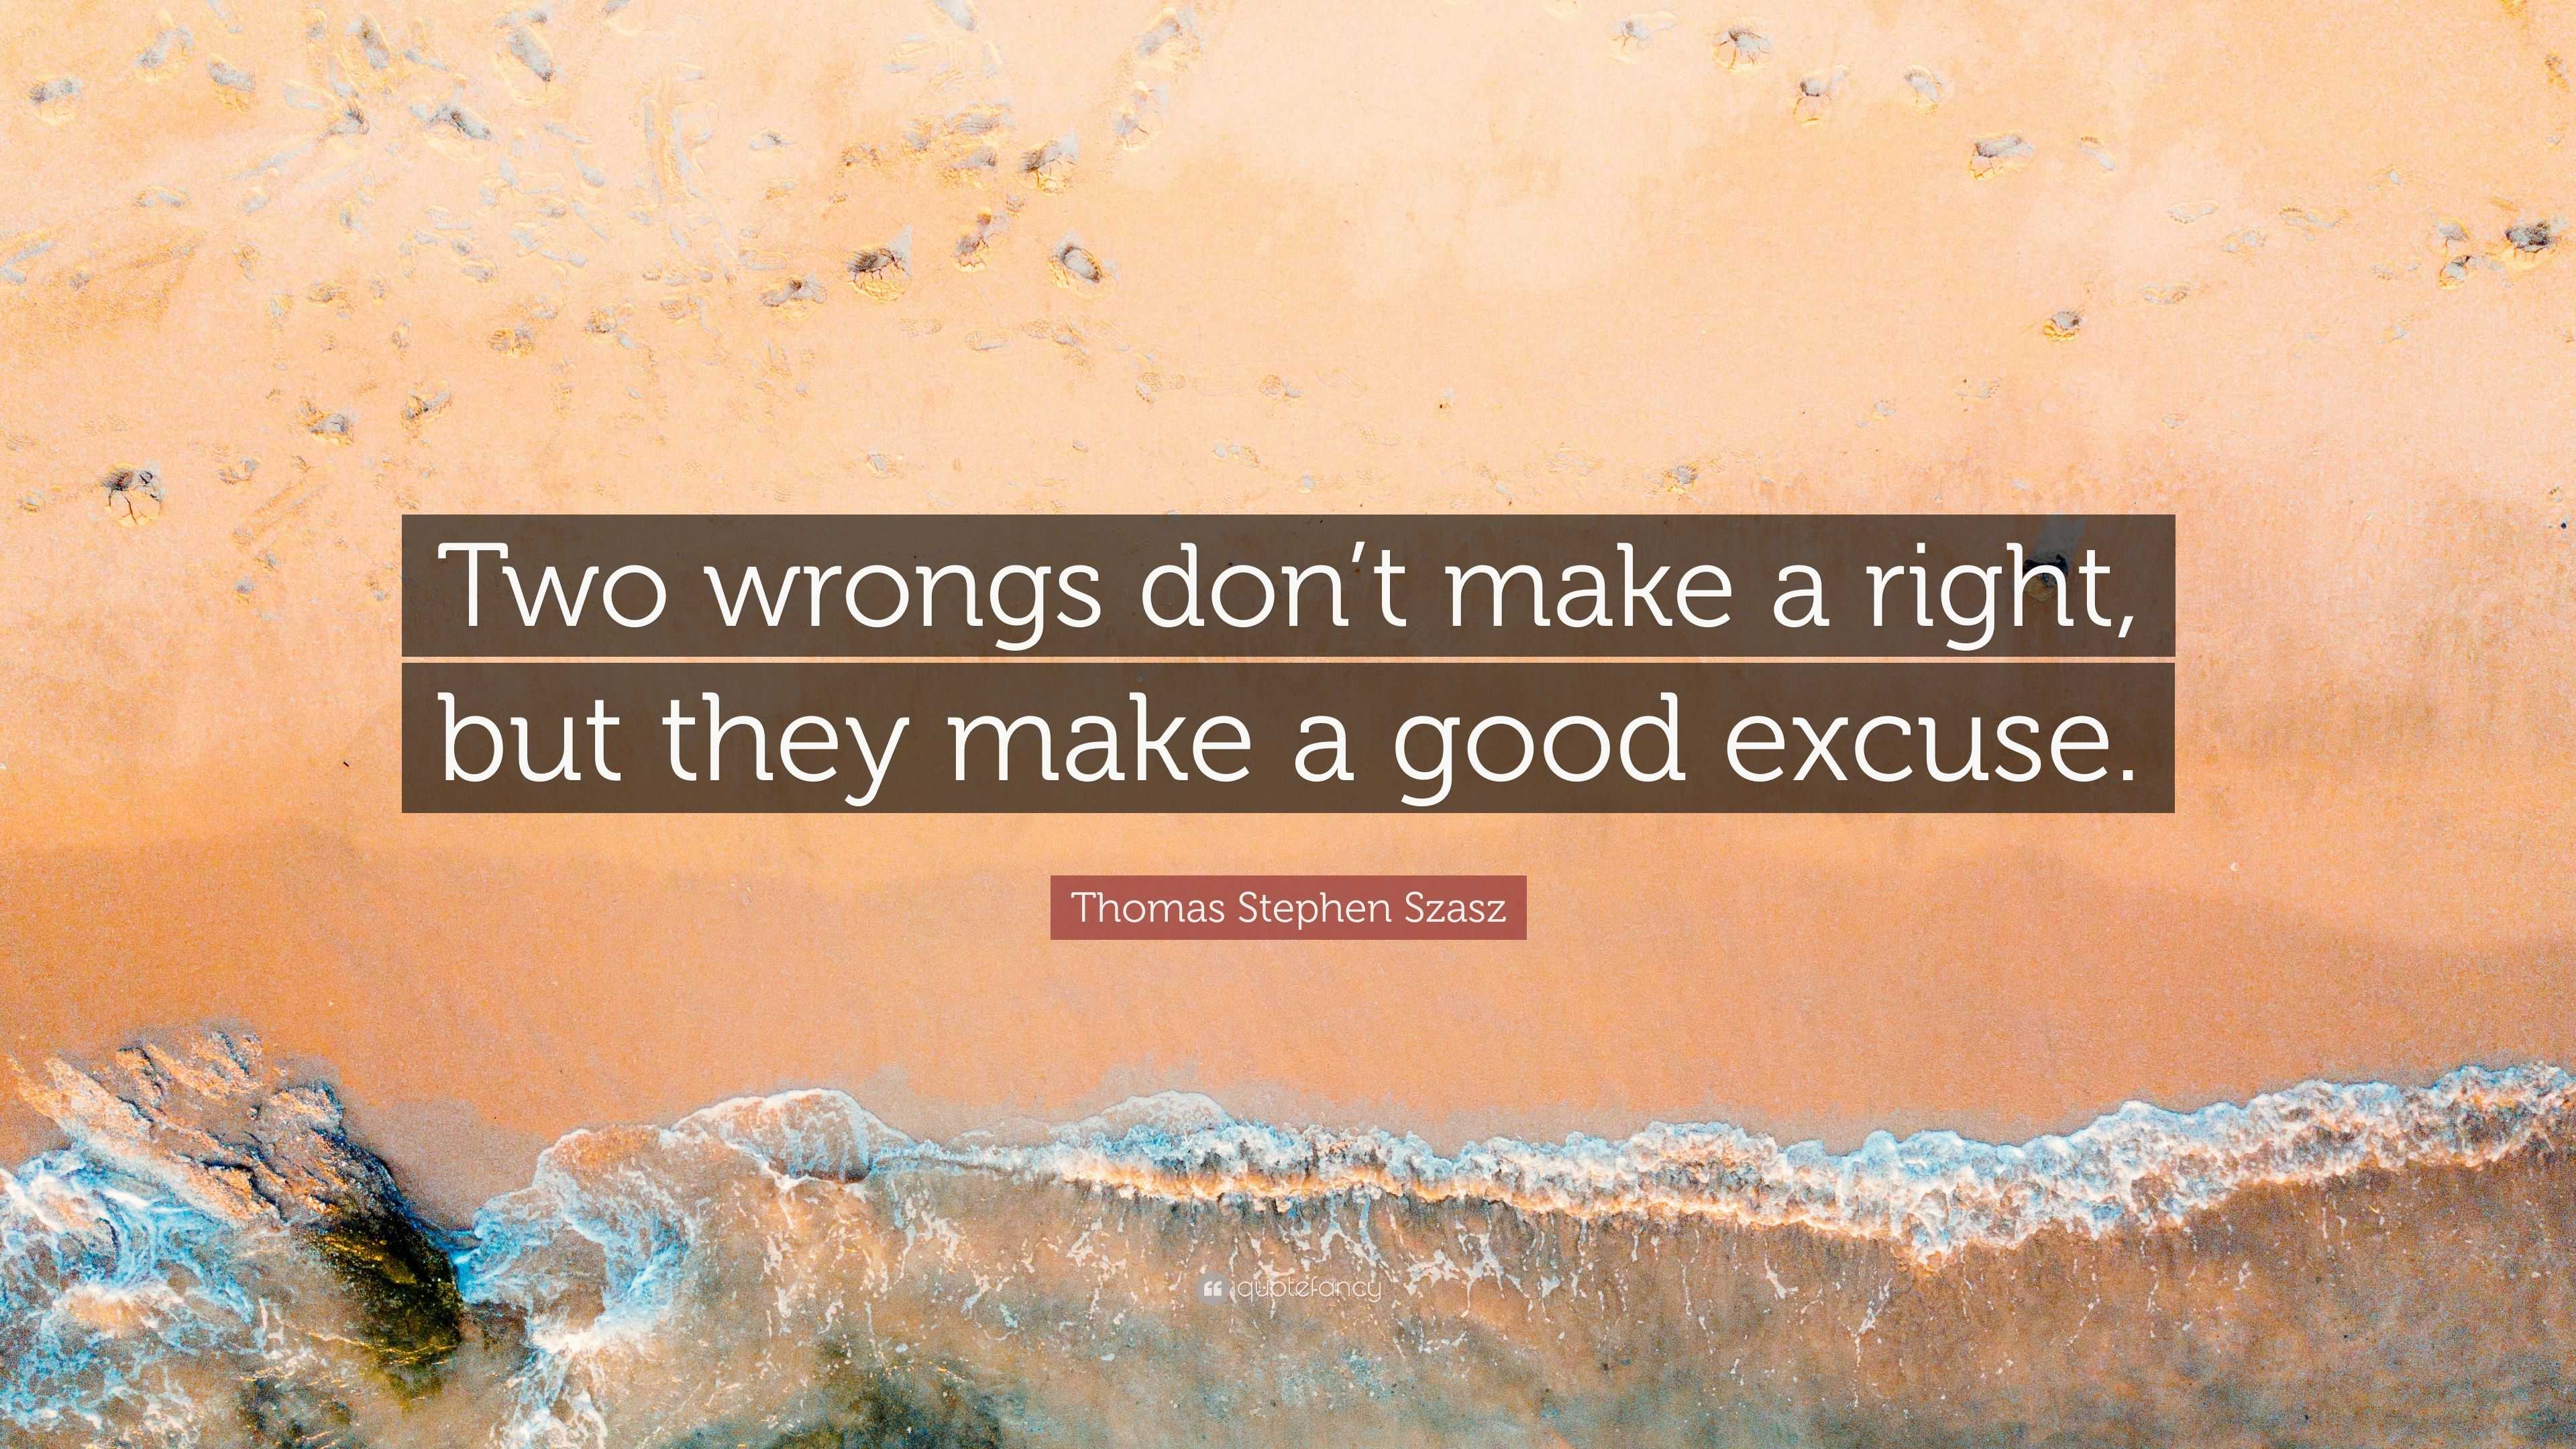 Thomas Stephen Szasz Quote: "Two wrongs don't make a right, but they make a good excuse." (17 ...